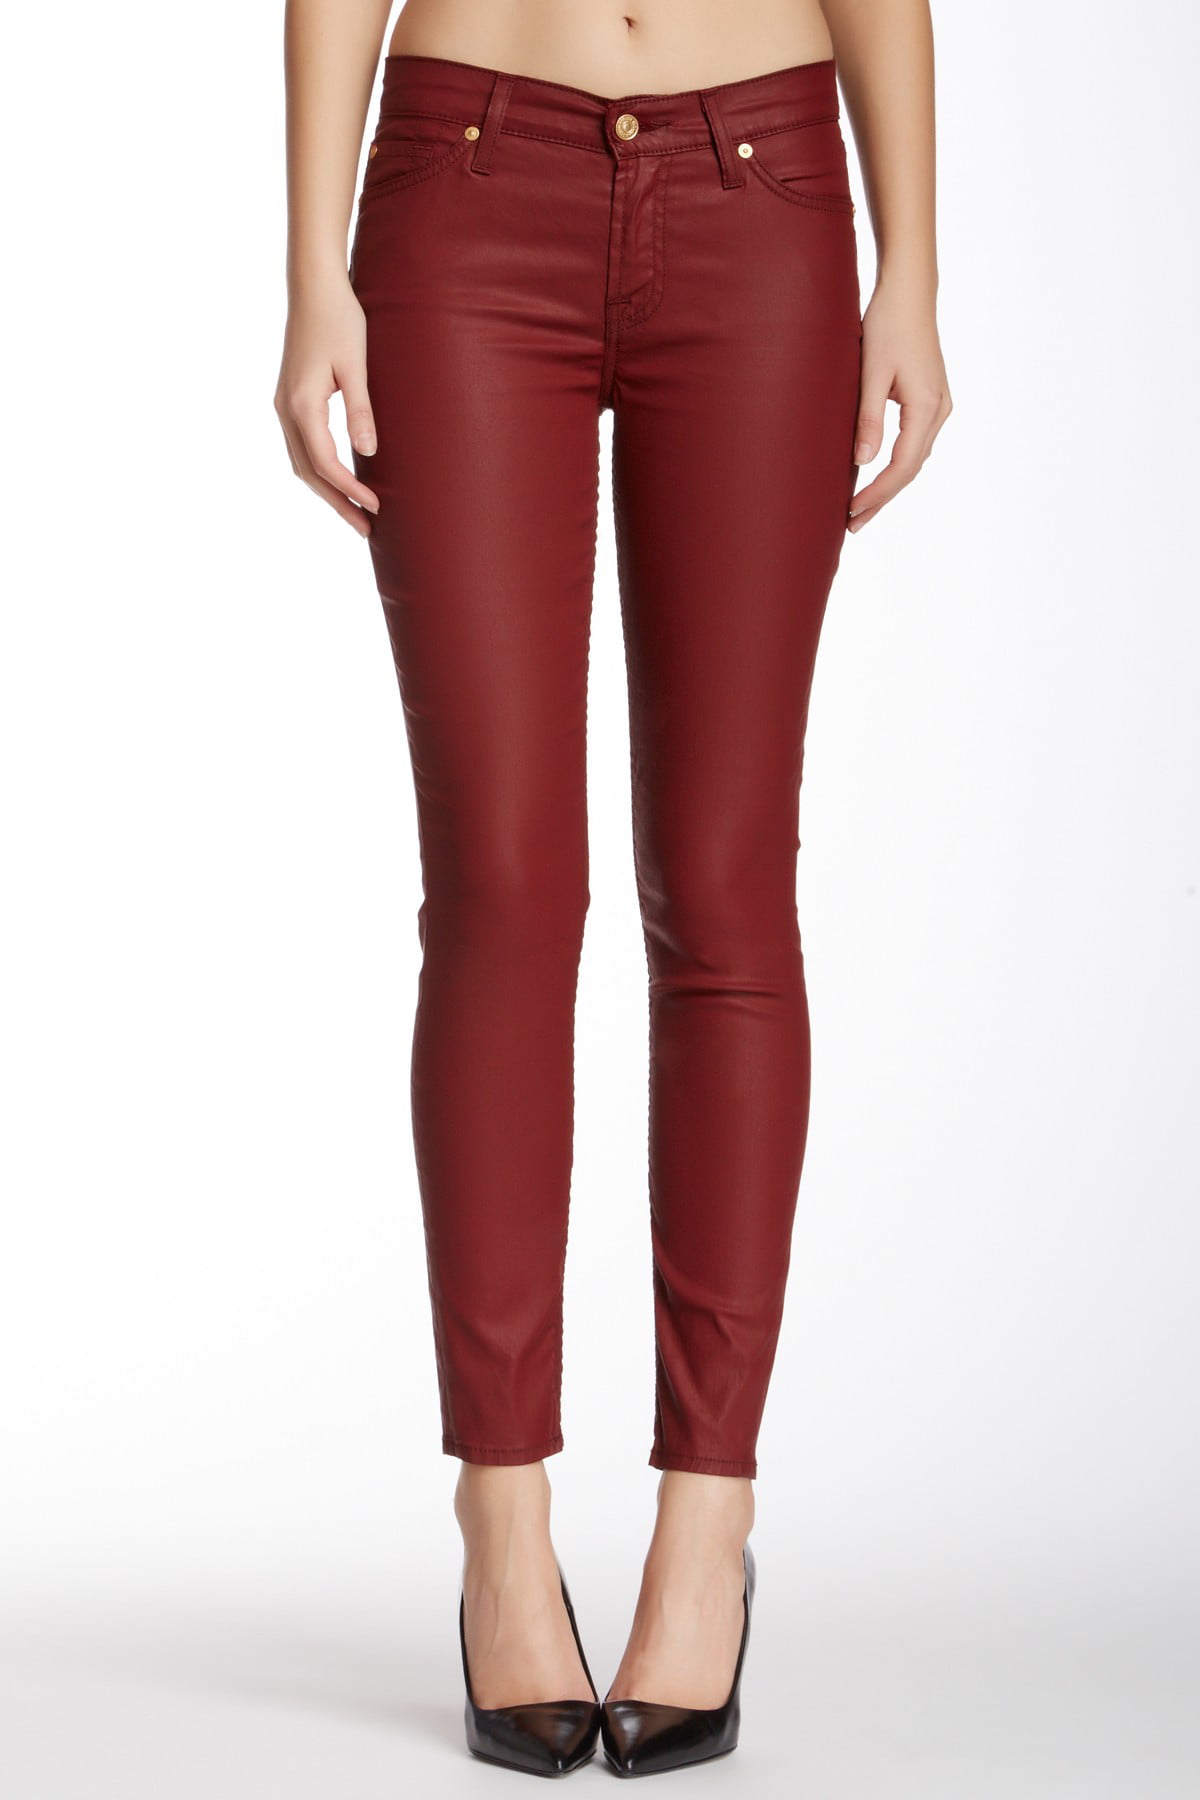 7 For All Mankind - 7 For All Mankind NEW Red Womens Size 28 Skinny ...